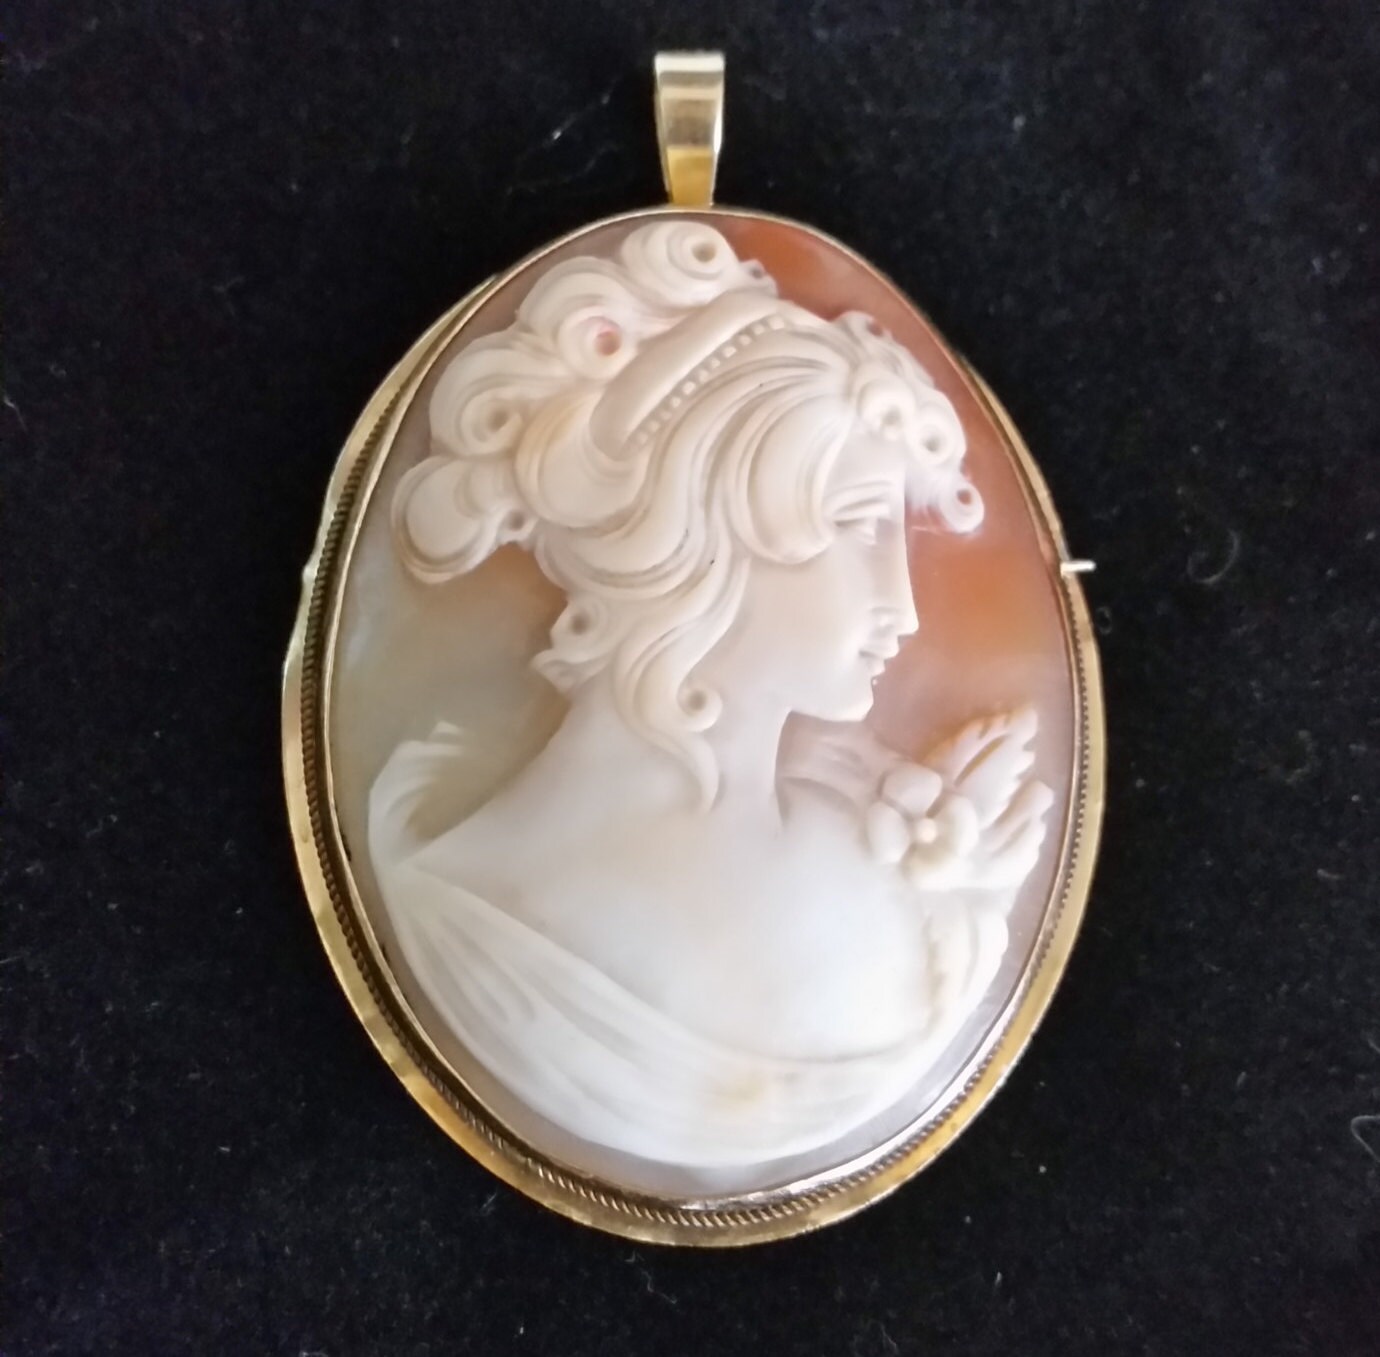 Vintage Hand Carved Cameo Pendant/Brooch by YanisBoutique on Etsy